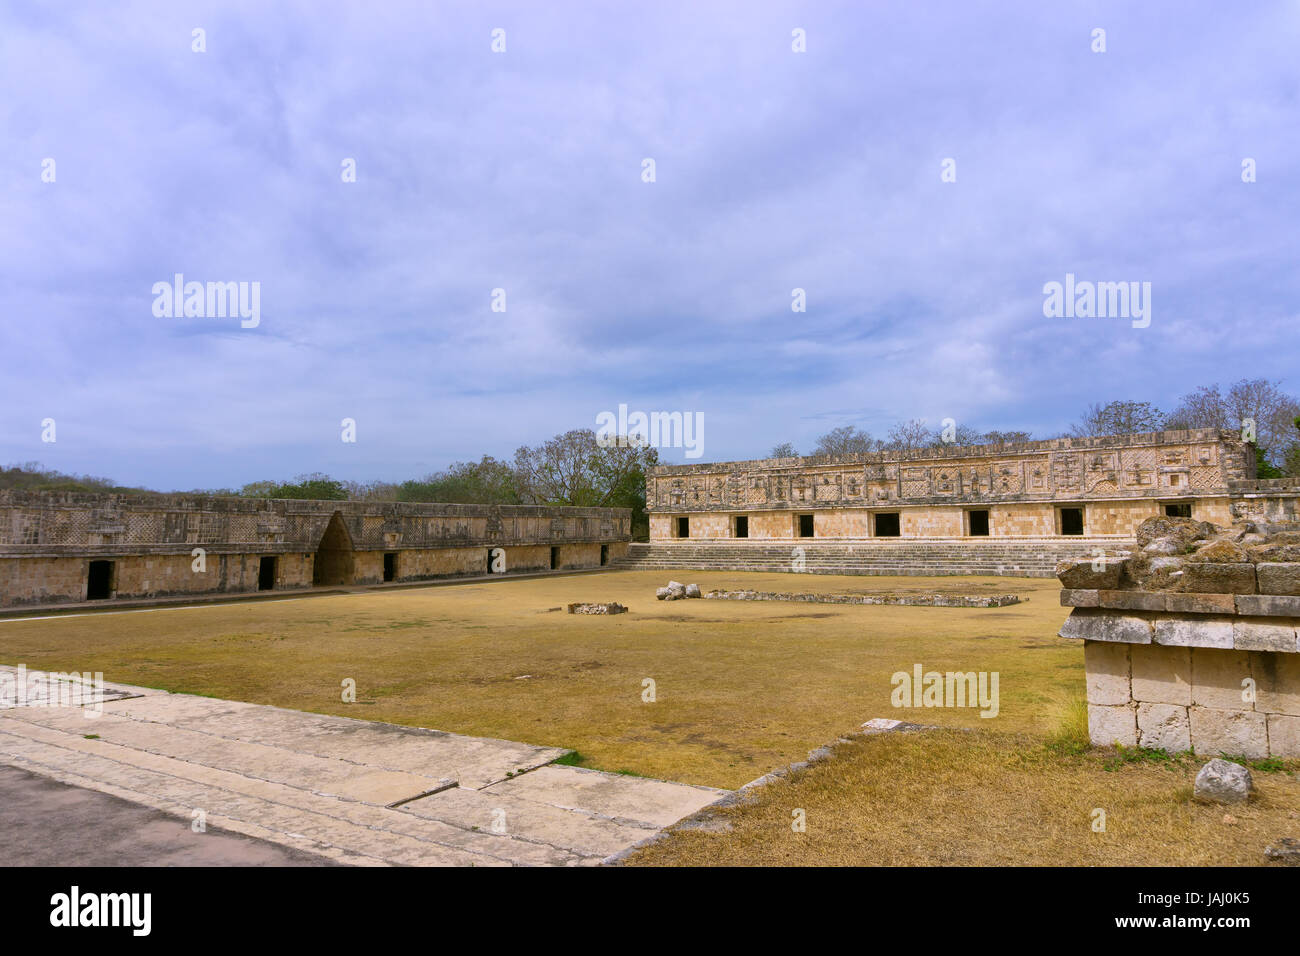 Courtyard of old Mayan ruins known as the Nunnery in Uxmal, Mexico ...